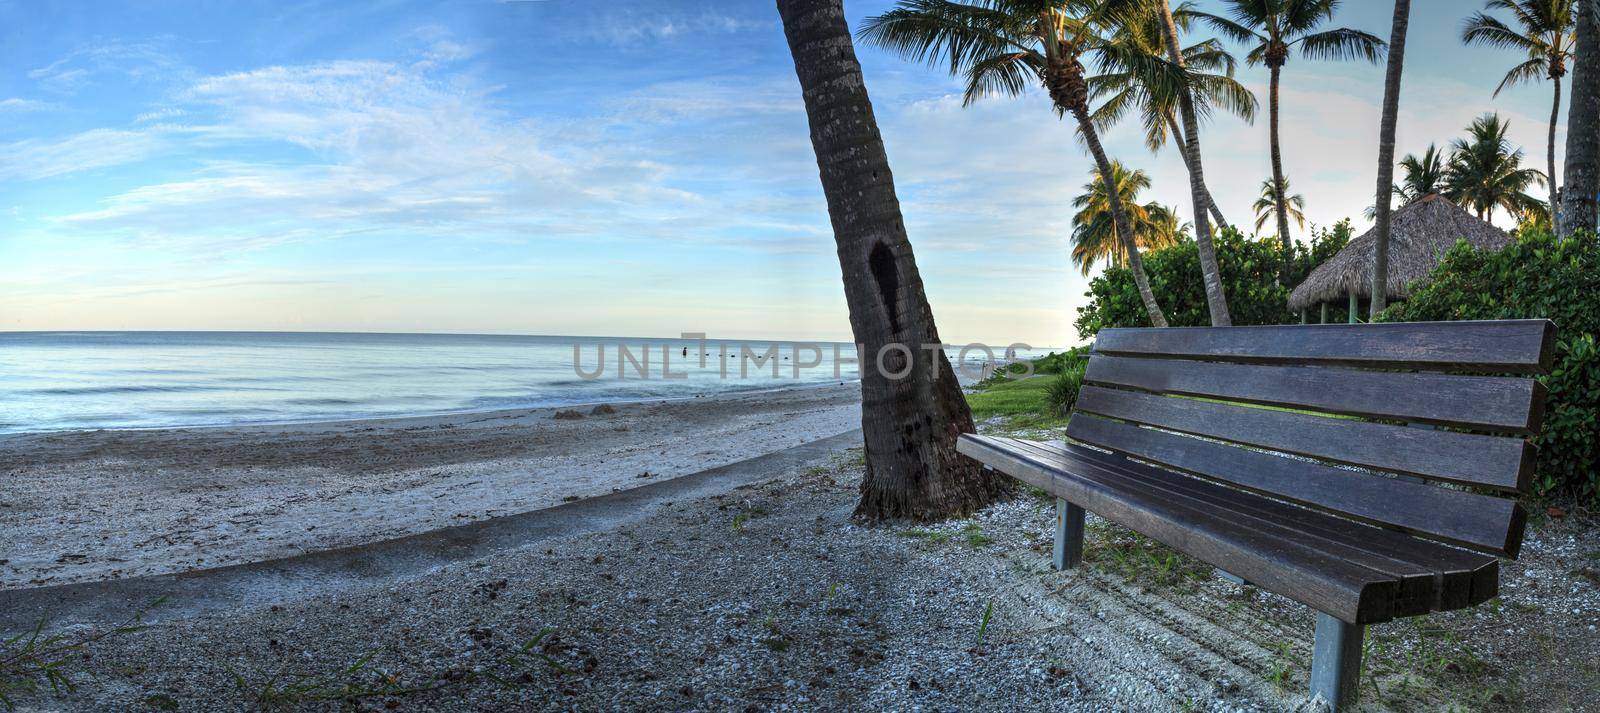 Bench overlooking the ocean at Port Royal Beach in Naples, Florida at sunrise.